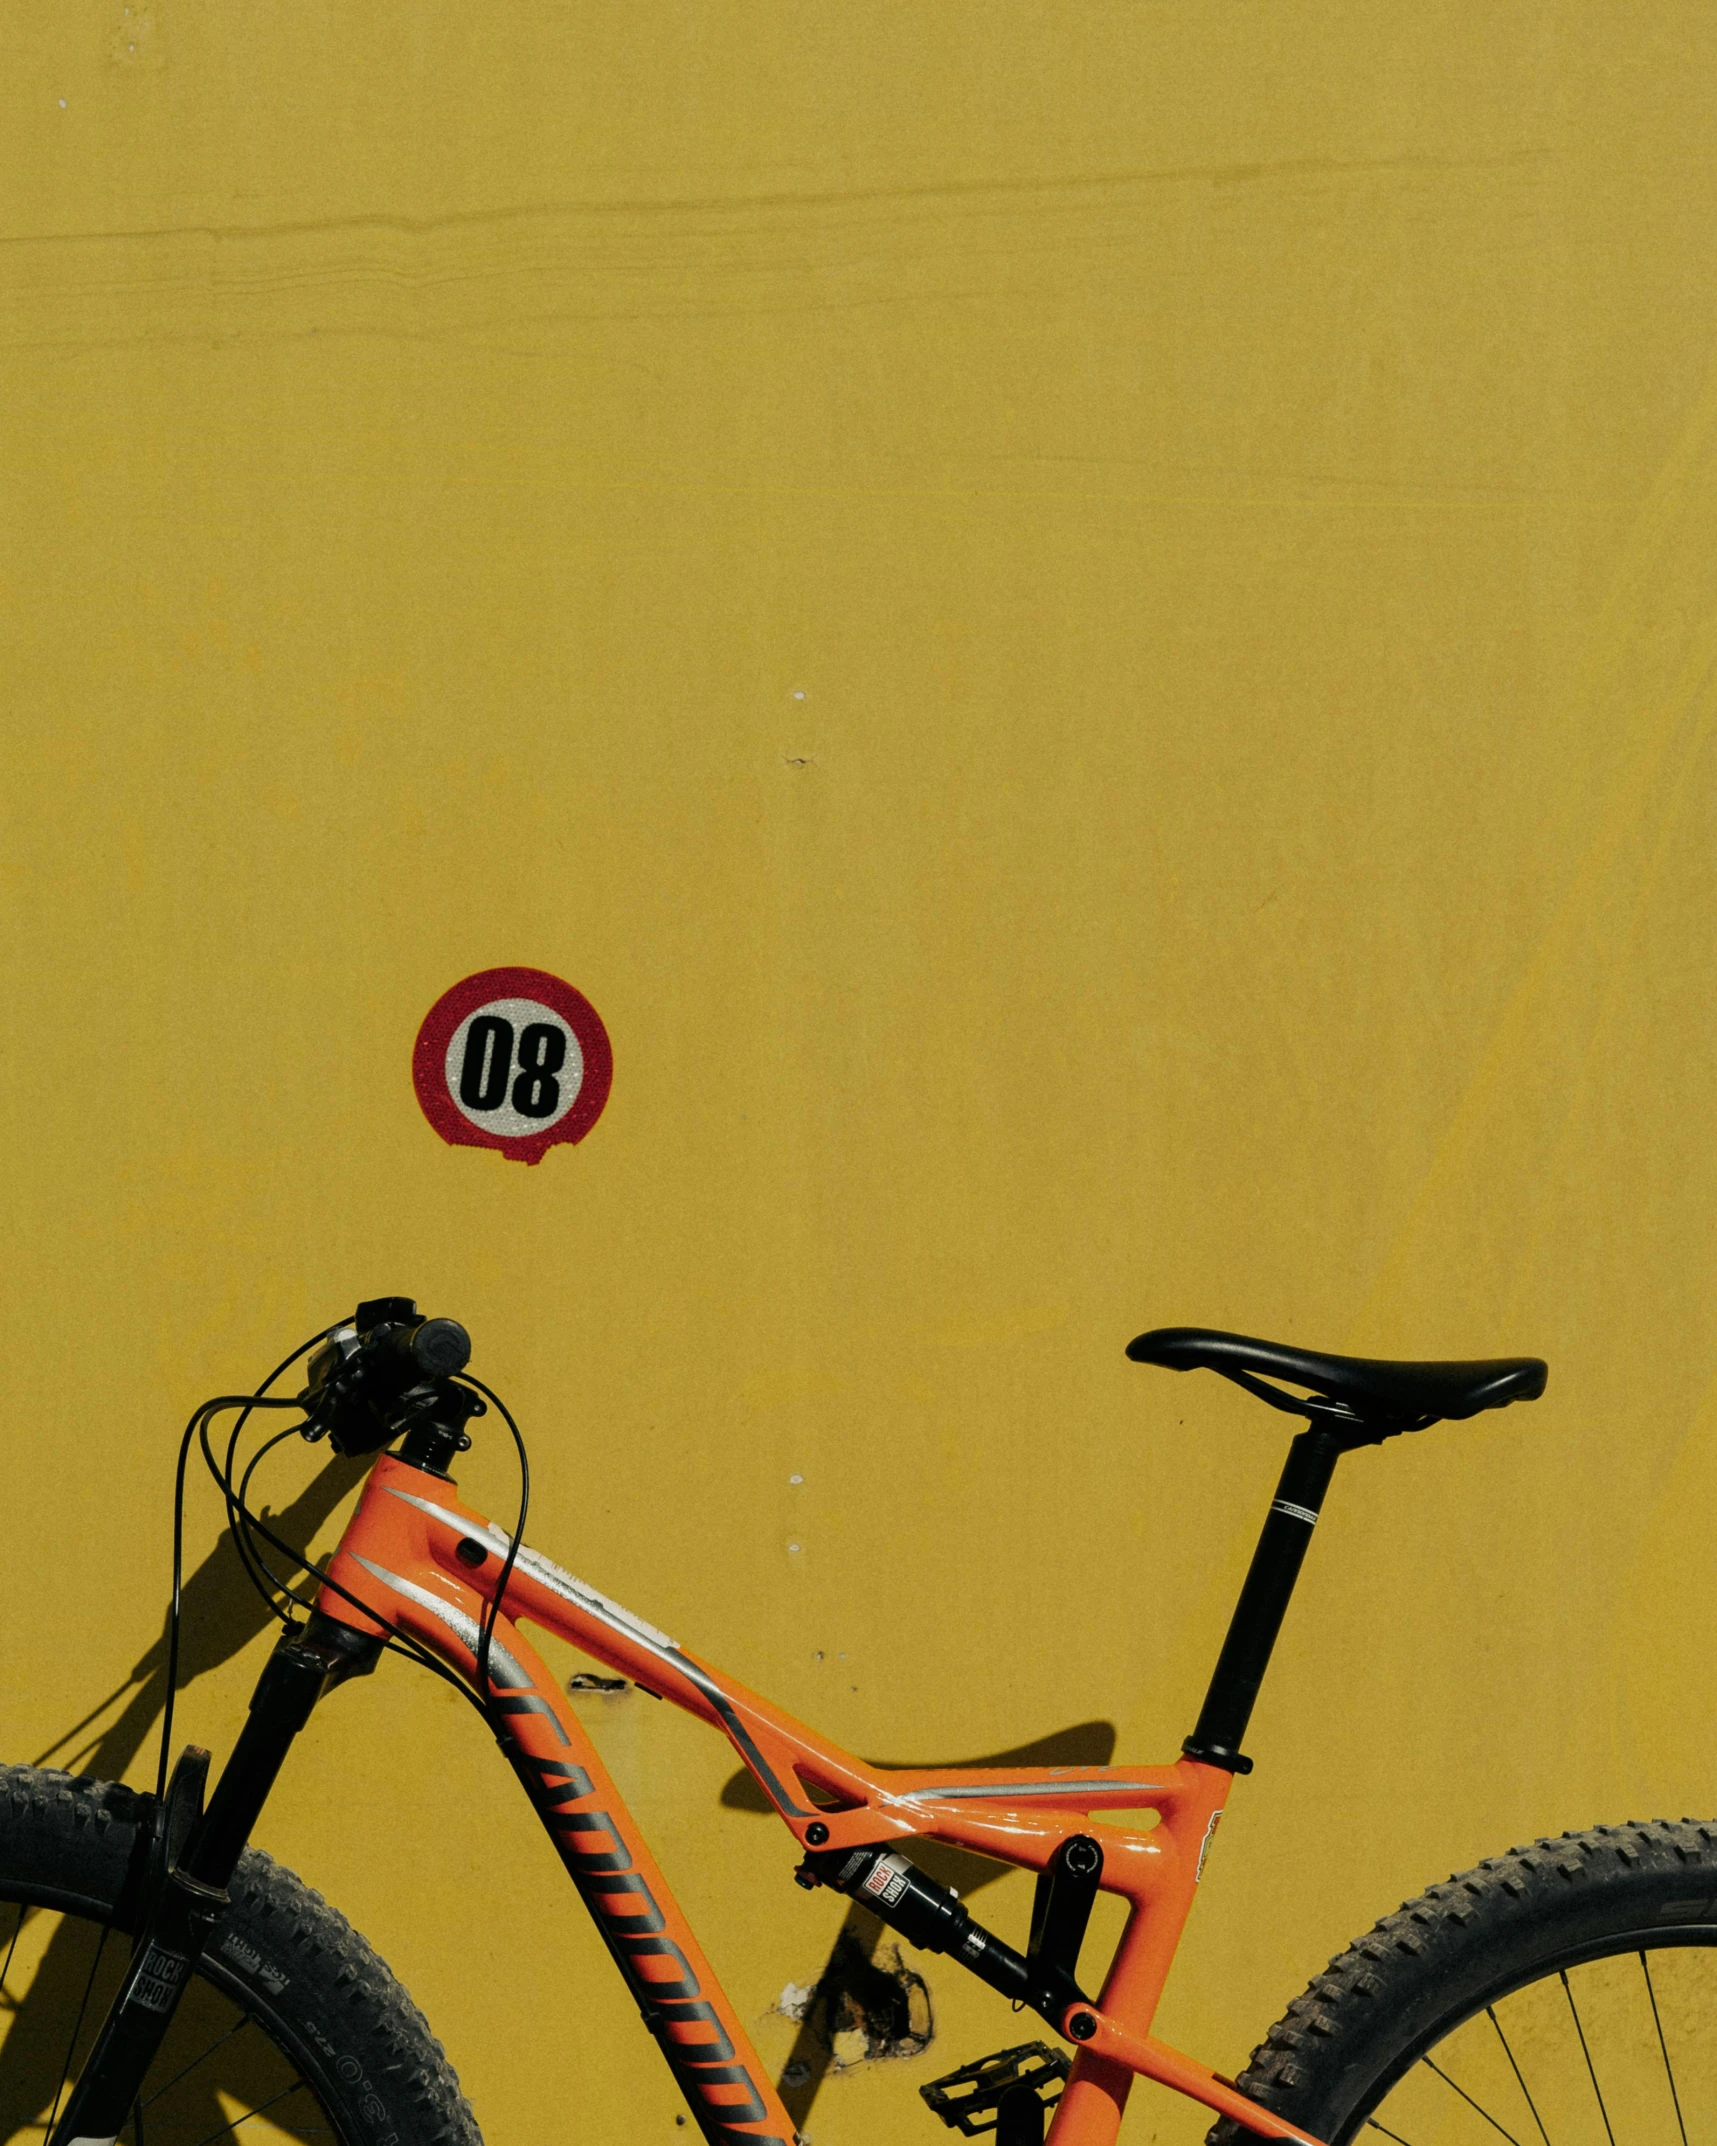 a bike leaning against a yellow wall with the number 98 on it